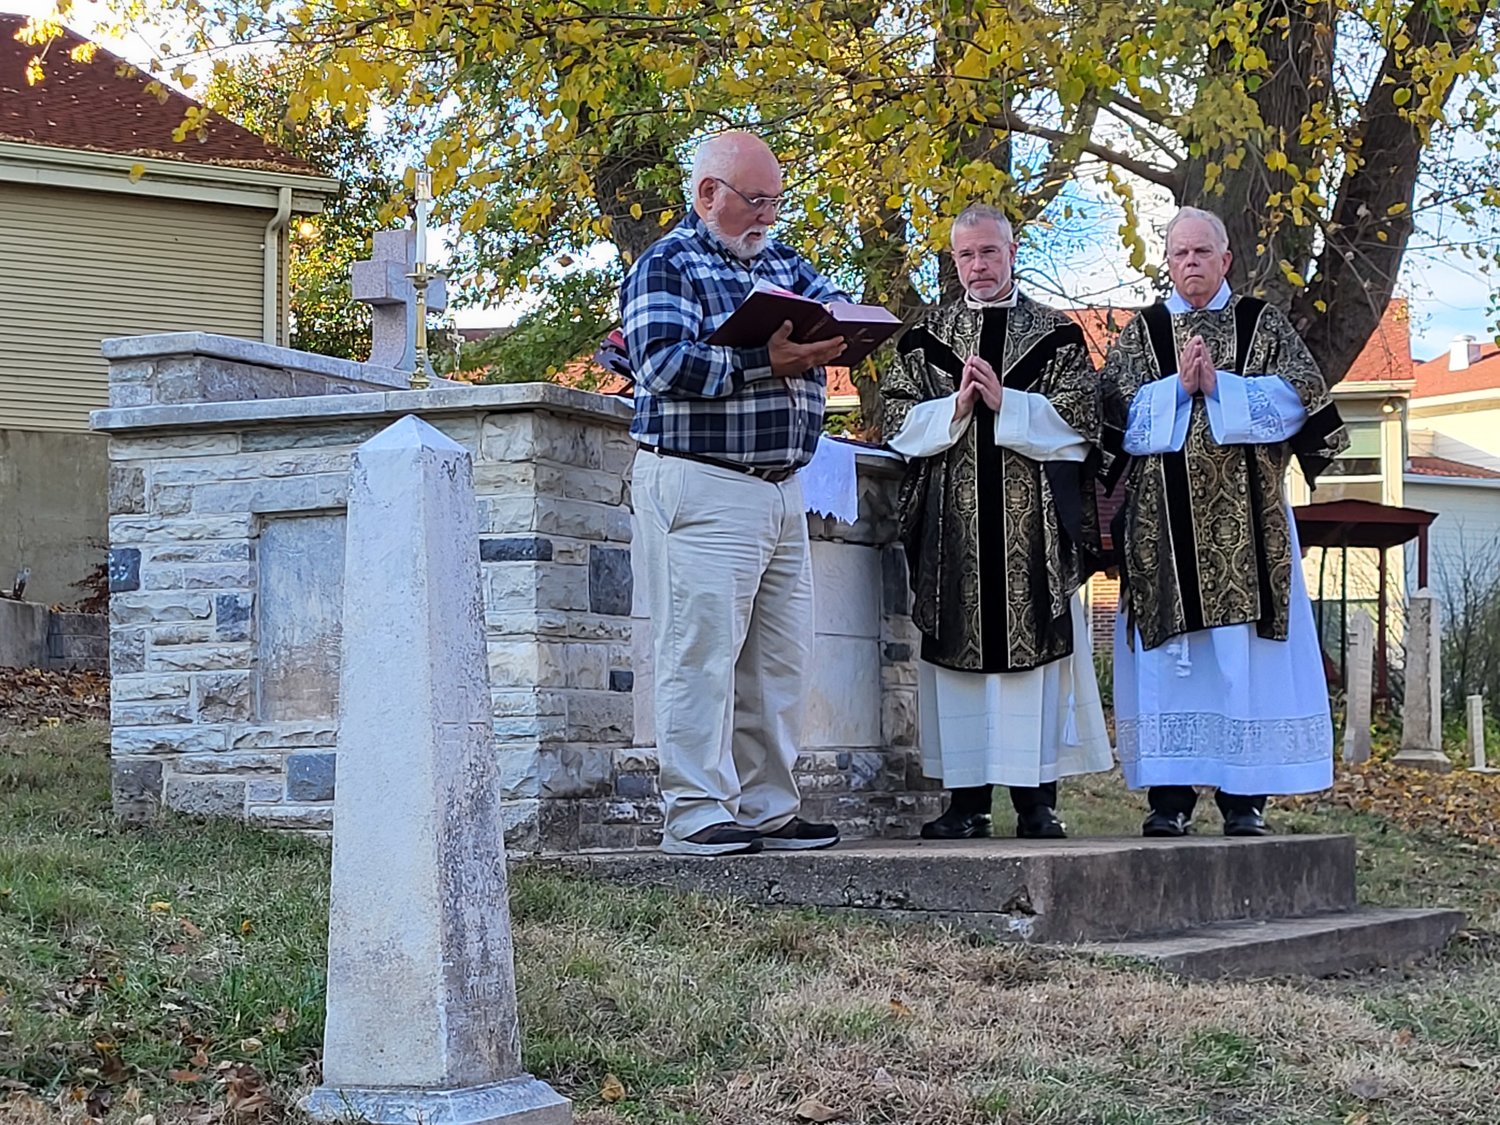 Father Jeremy Secrist, pastor of St. Peter Parish in Jefferson City, offers Mass in the recently restored St. Peter Cemetery 1, in which burials took place from the 1840s until about 1880, on All Souls Day.